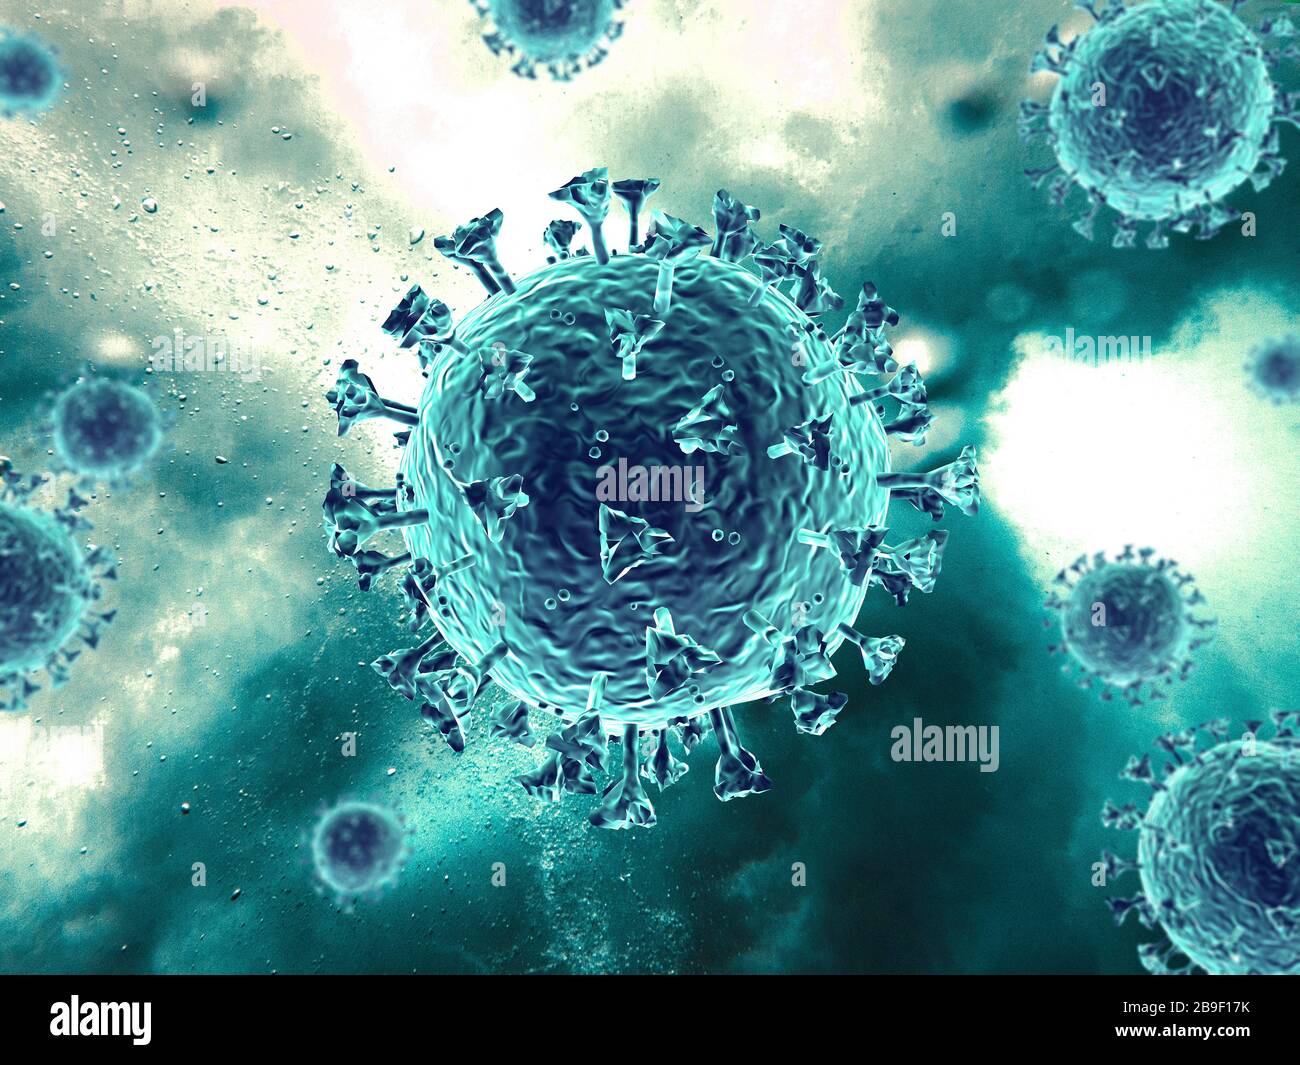 3D illustration of a turquoise colored coronavirus on a turquoise background. Stock Photo